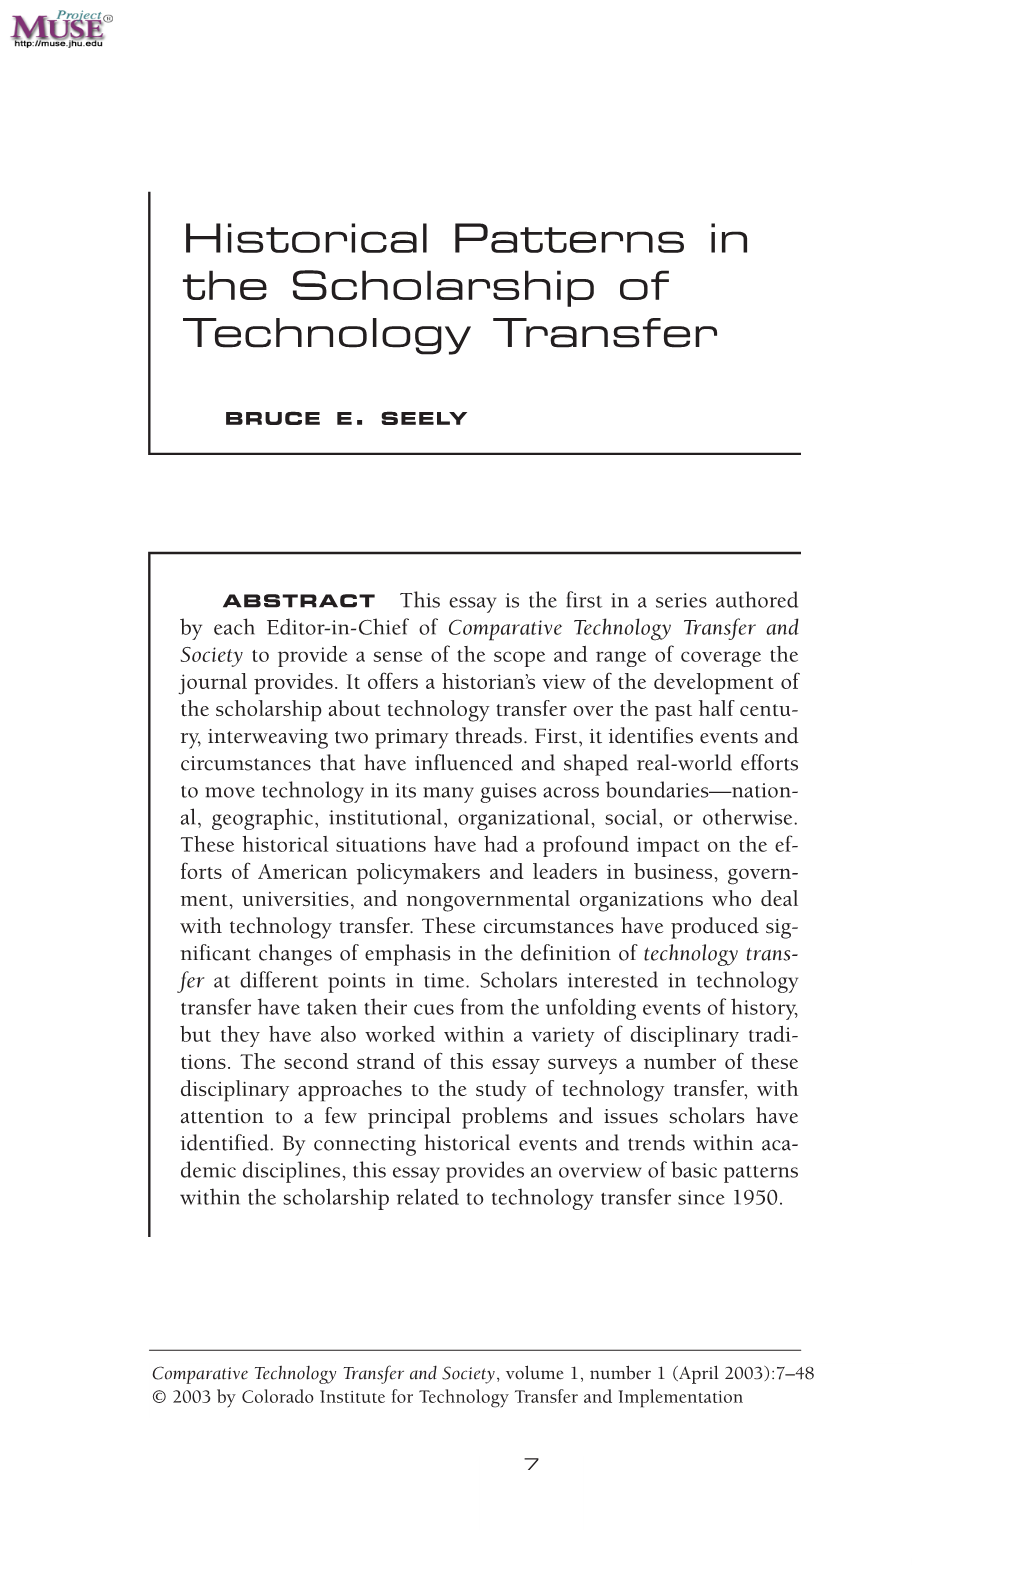 Historical Patterns in the Scholarship of Technology Transfer